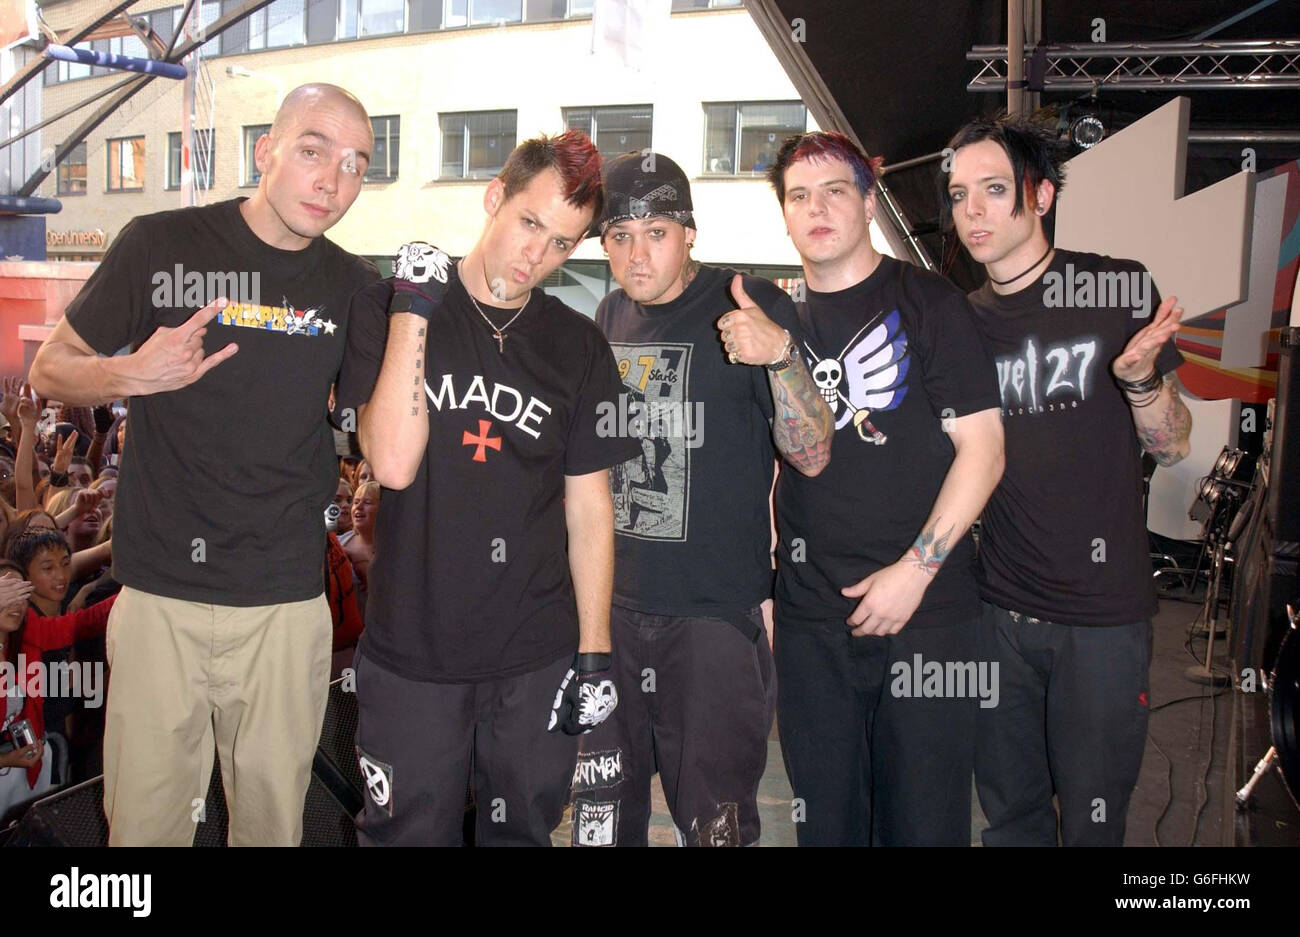 Rock group Good Charlotte (l-r) Chris Wilson, Joel Madden, Benji Madden, Paul Thomas, and Billy Martin pose for the media during the live recording of the British edition of MTV's TRL (Total Request Live) at MTV's Studios in Camden, north London. Stock Photo